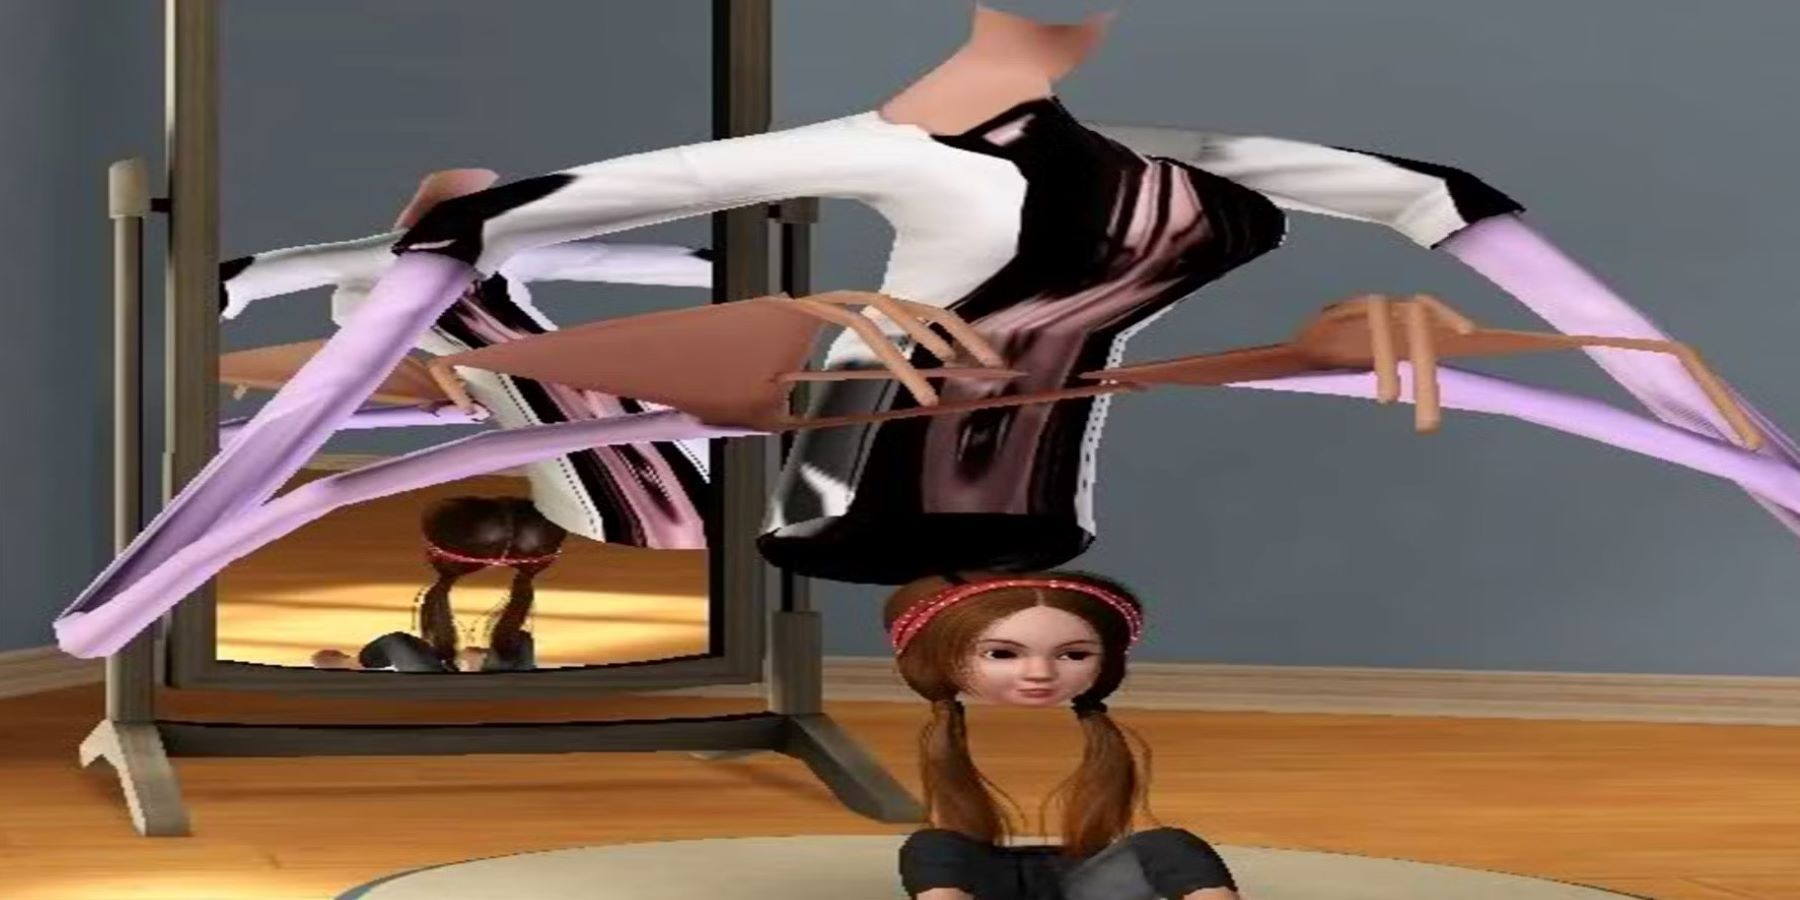 Sims 4 Glitches That Should Be Turned Into Sims 5 Mechanics